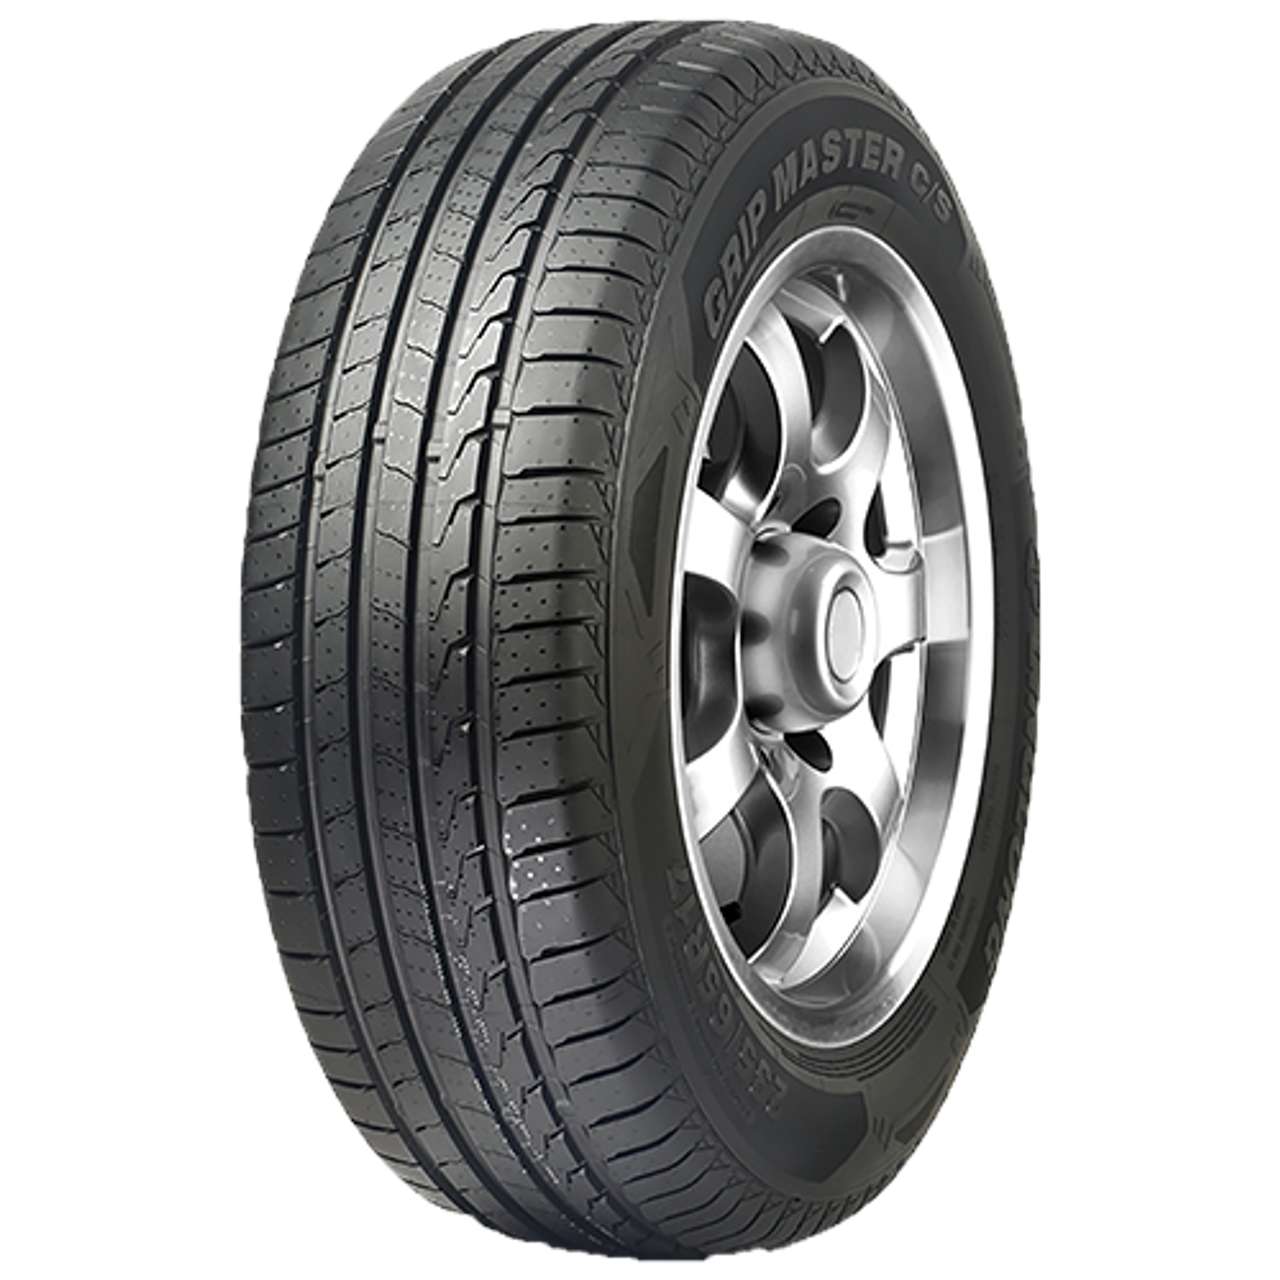 LINGLONG GRIP MASTER C/S 215/65R16 102H BSW XL